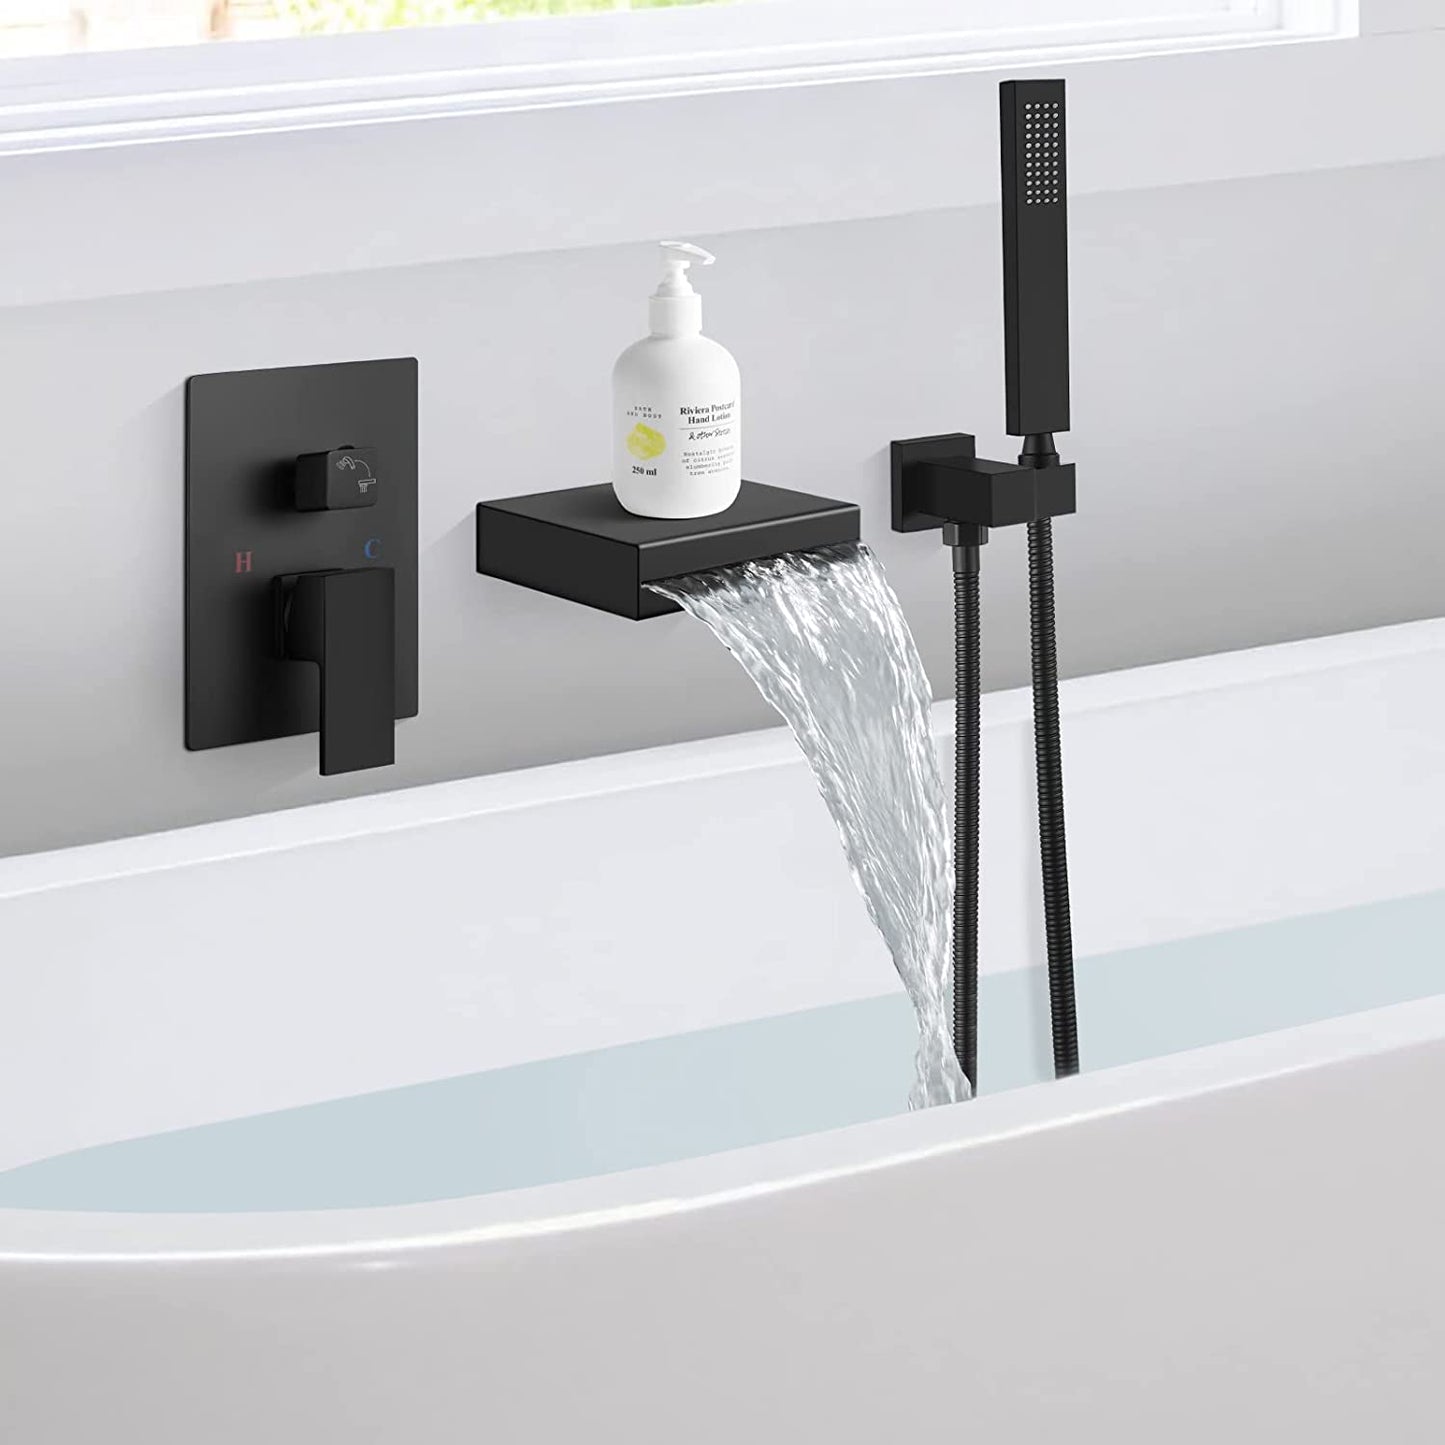 
                  
                    Cinwiny Wall Mount Waterfall Tub Filler Spout with Handheld Shower Single Handle Bathtub Shower Faucet Set Rough in Valve Brass
                  
                